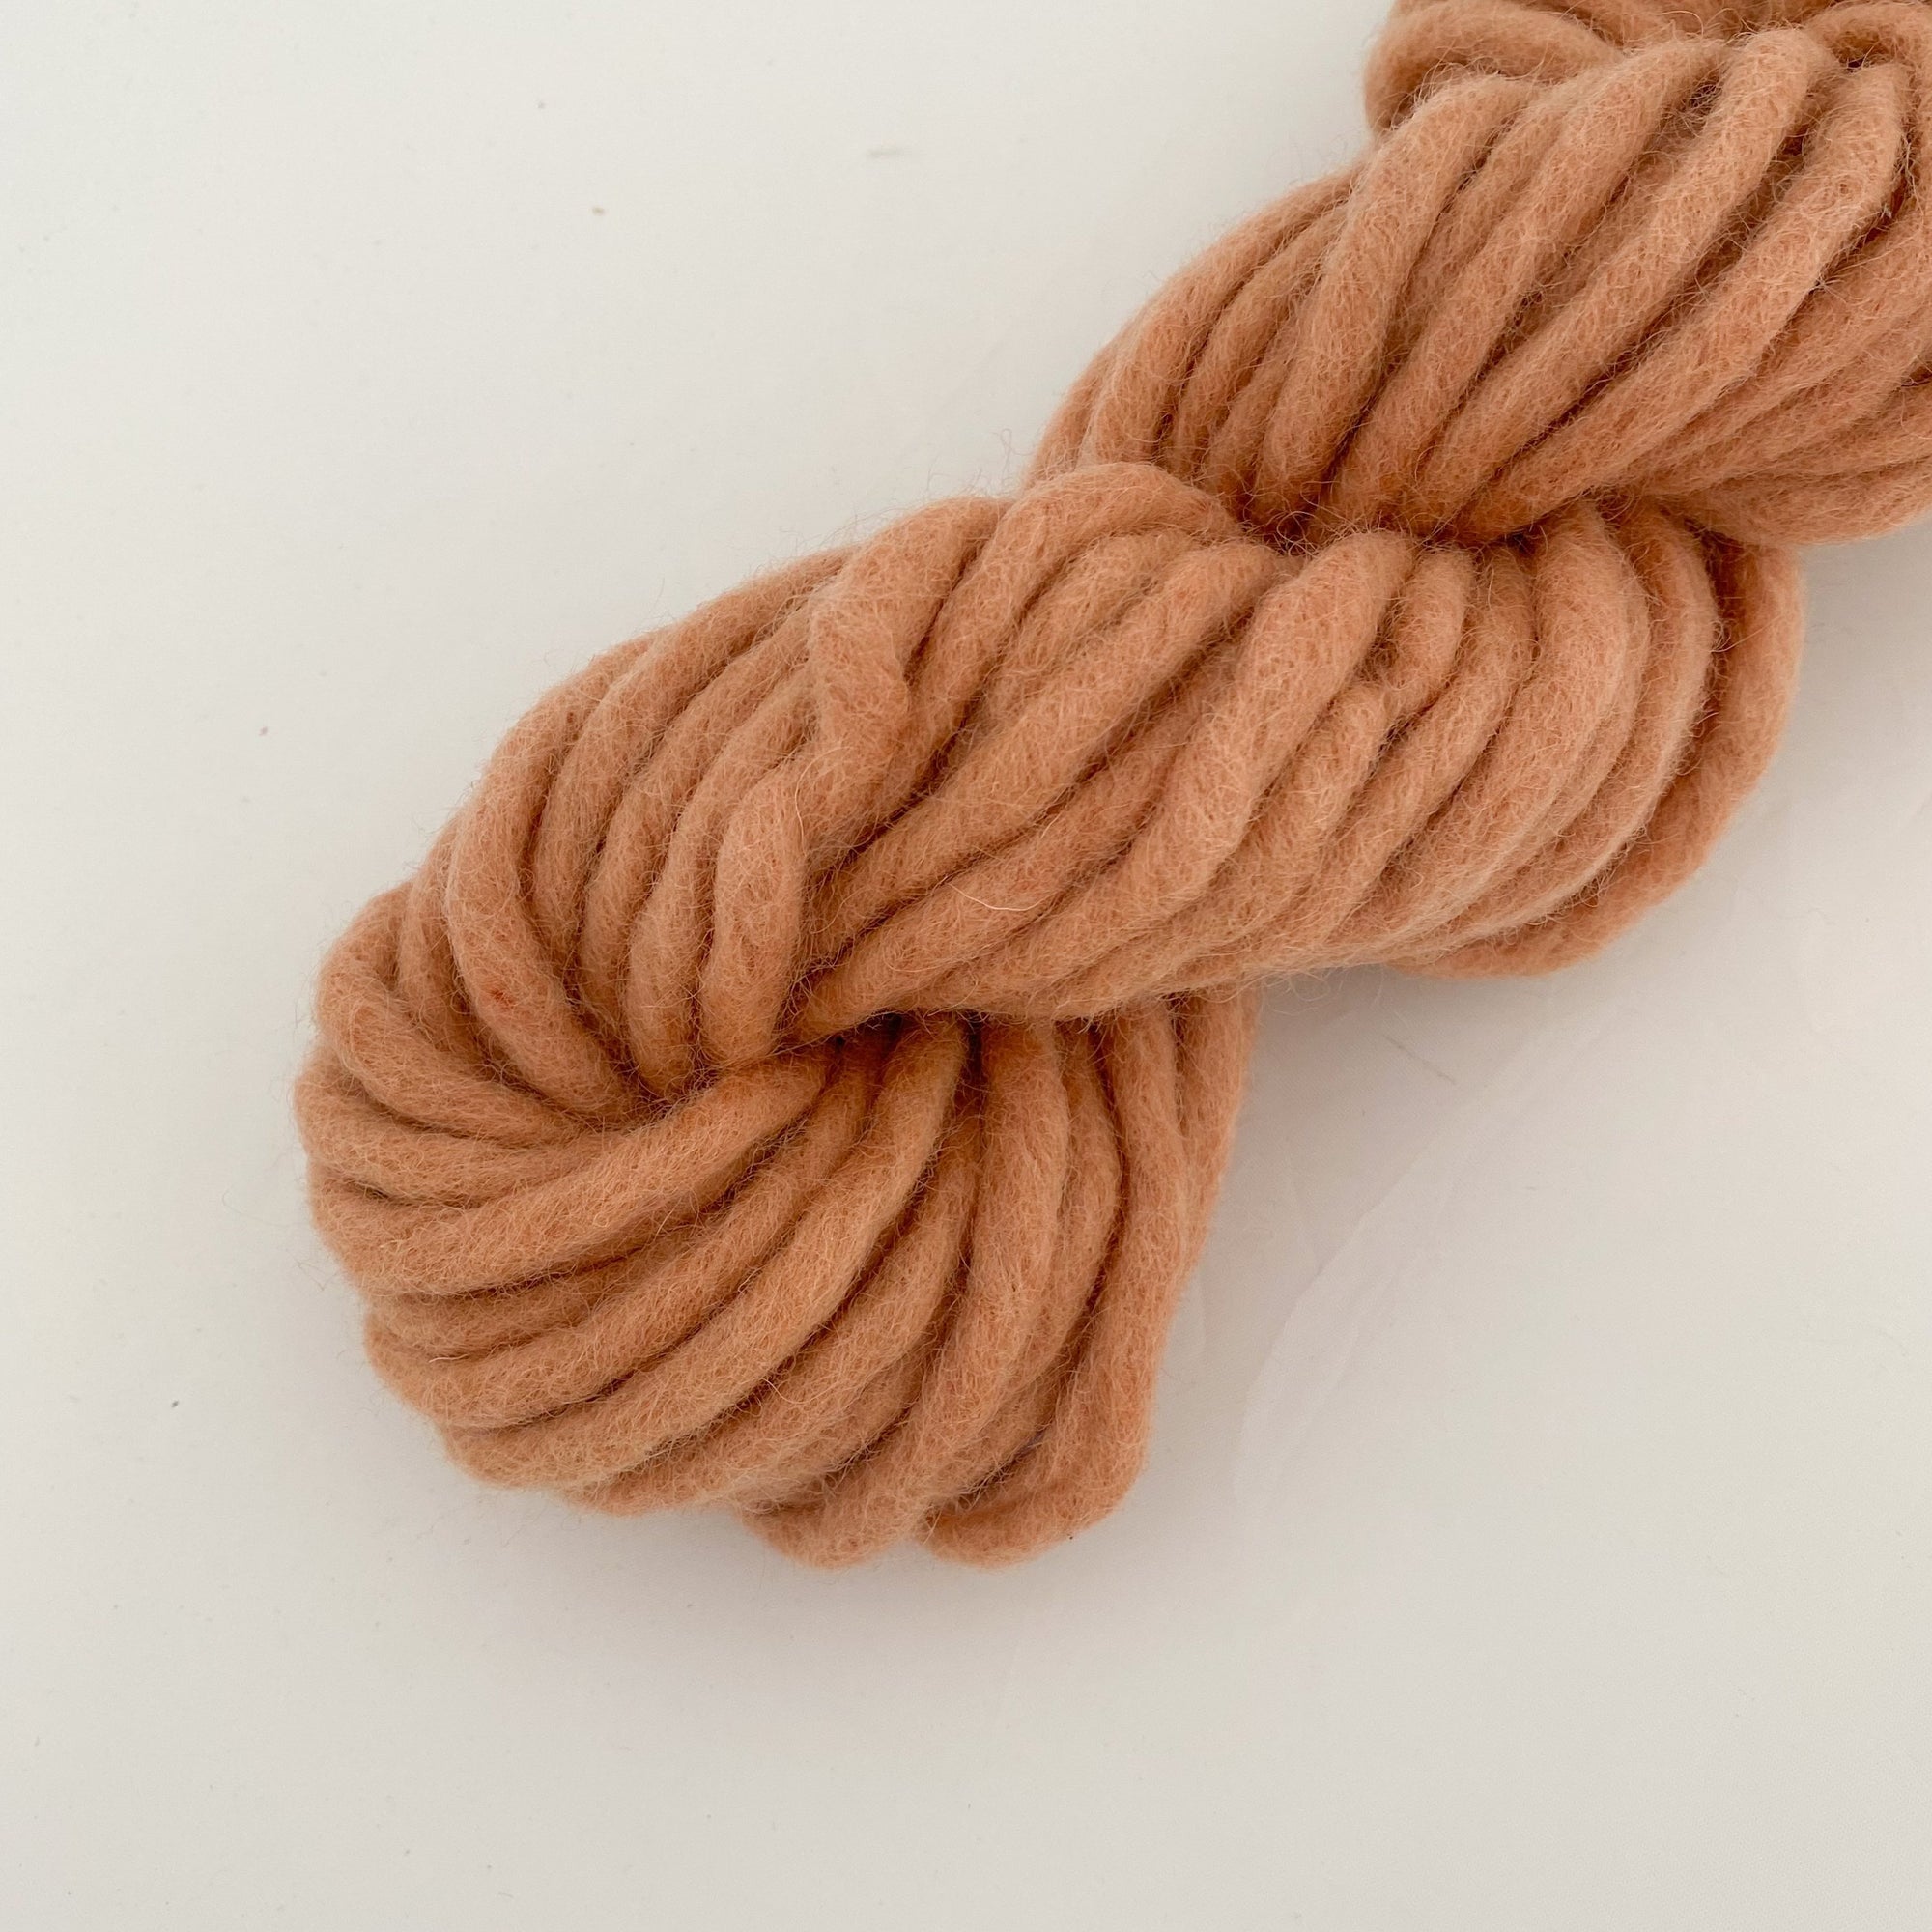 Mary Maker Studio speciality fibre Iced Coral Felted Finger Rope macrame cotton macrame rope macrame workshop macrame patterns macrame